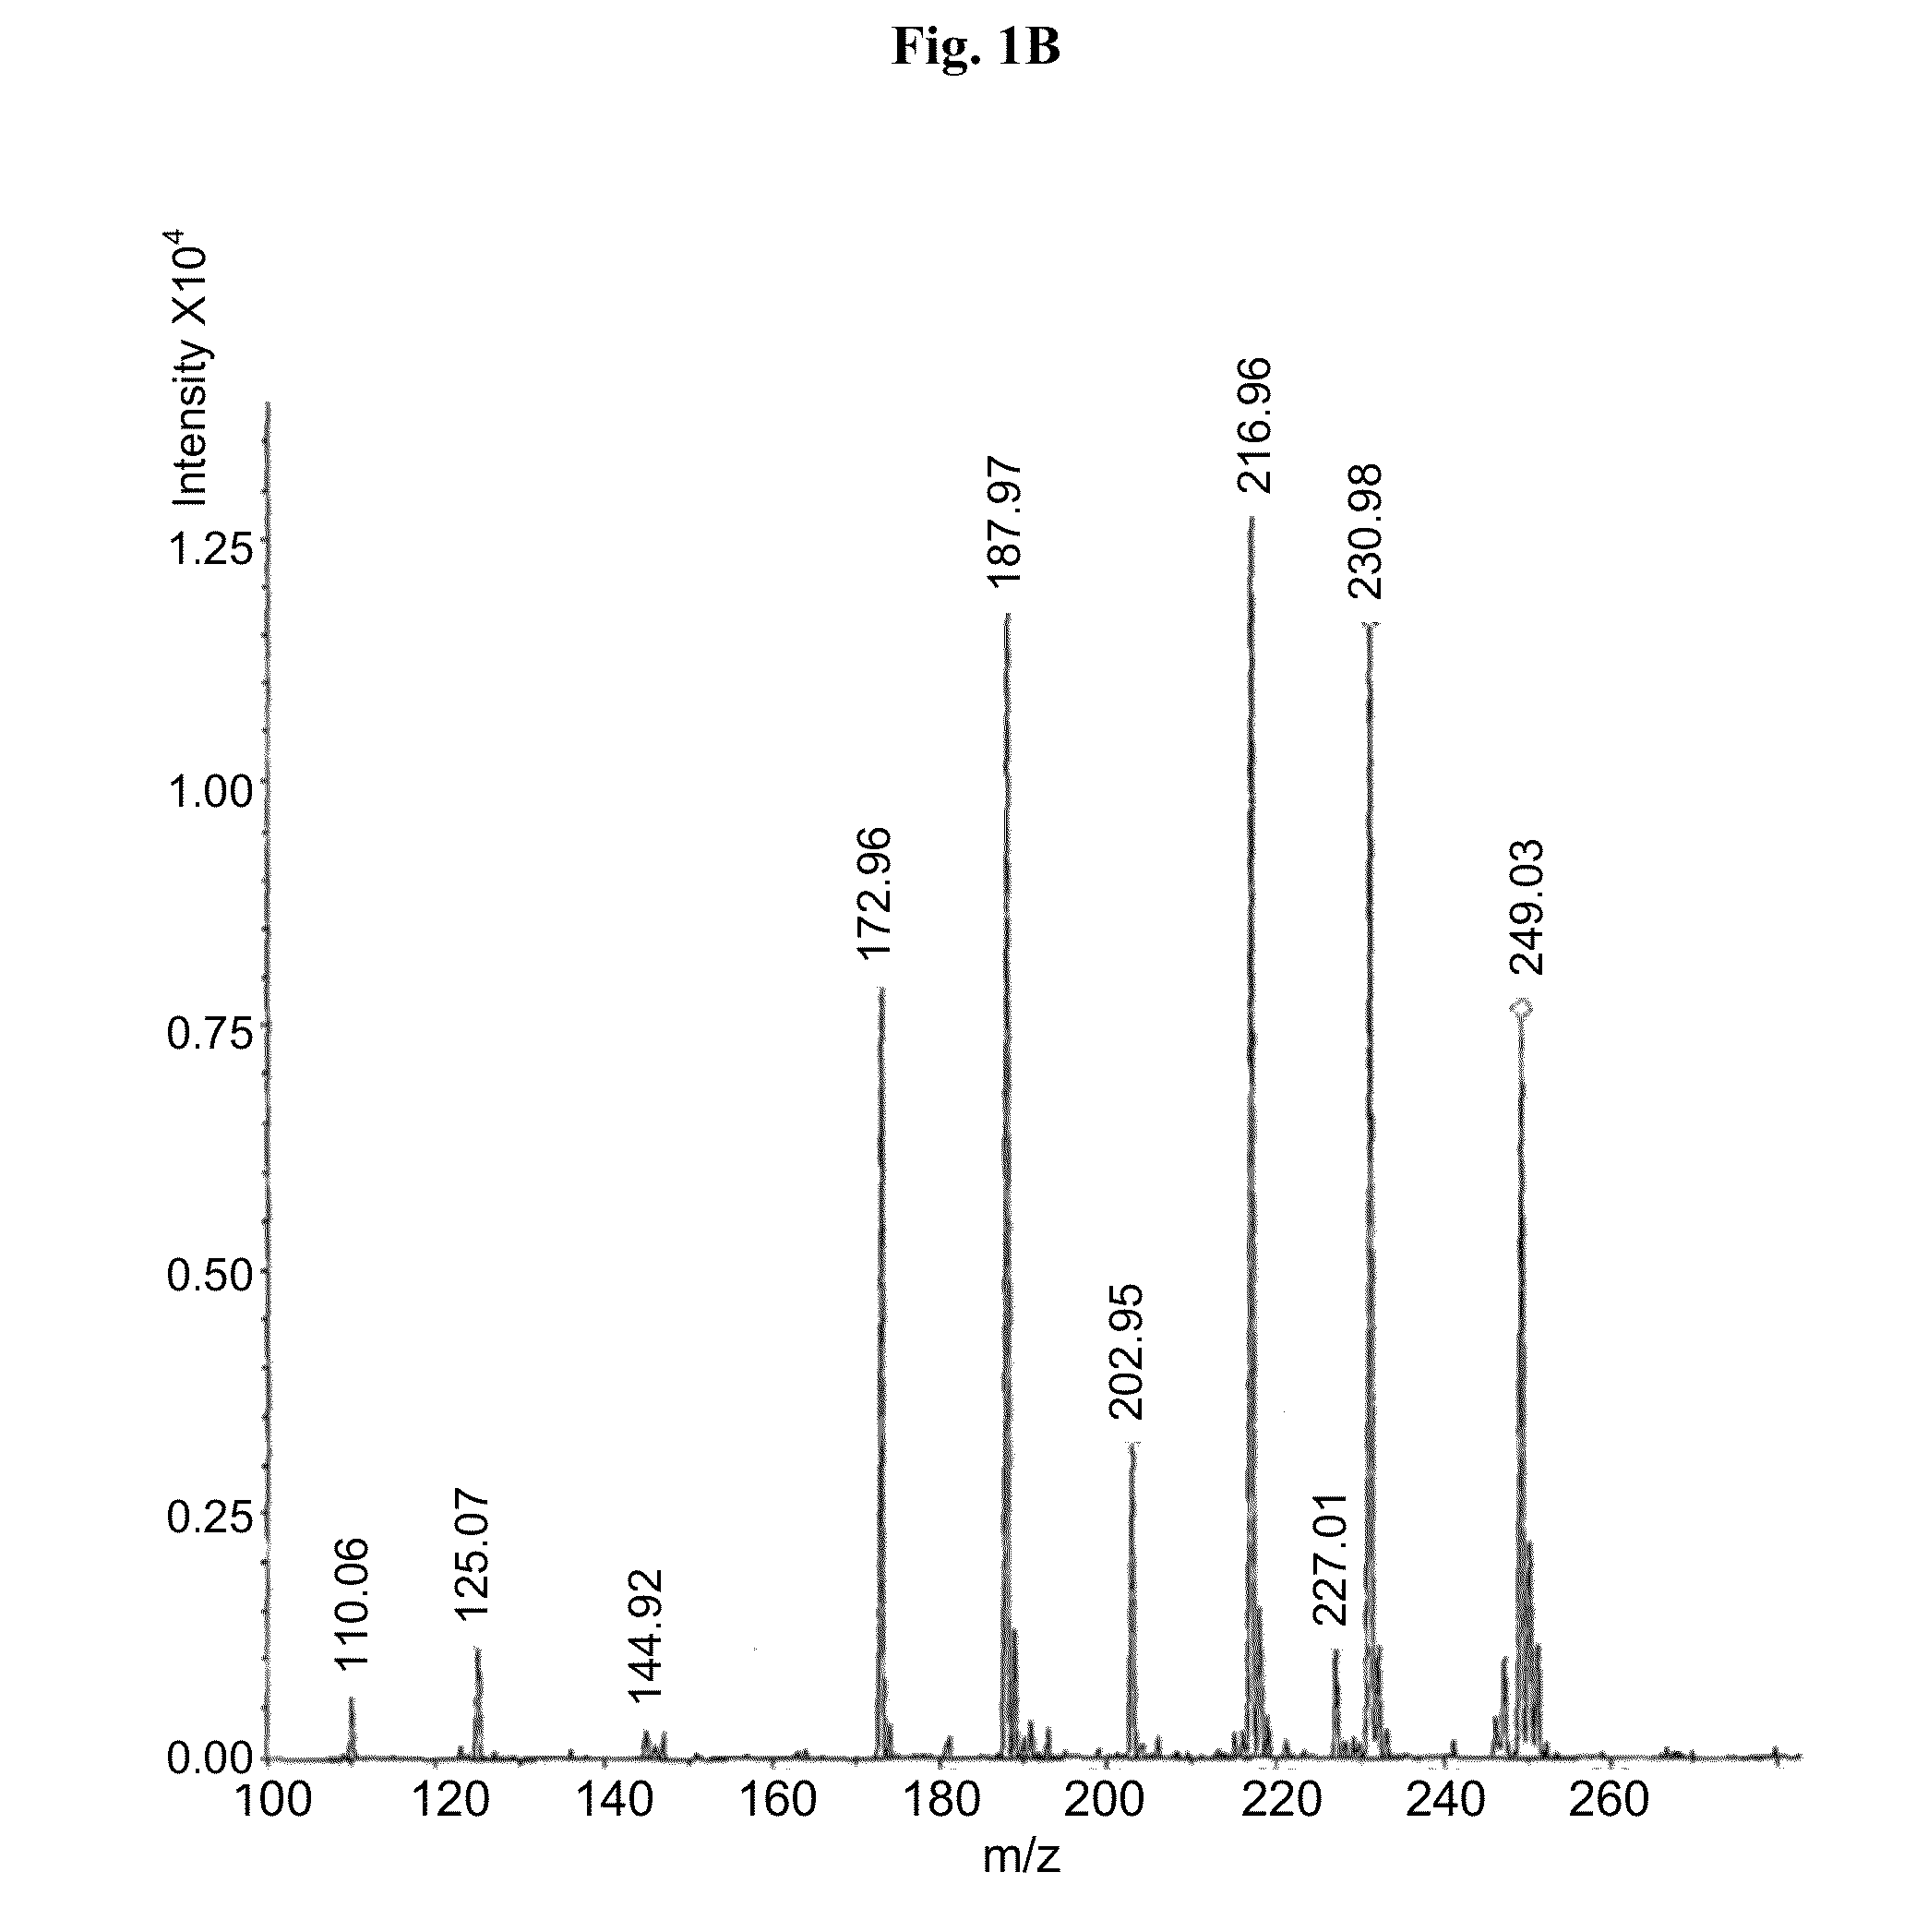 Continuous administration of dopa decarboxylase inhibitors and compositions for same